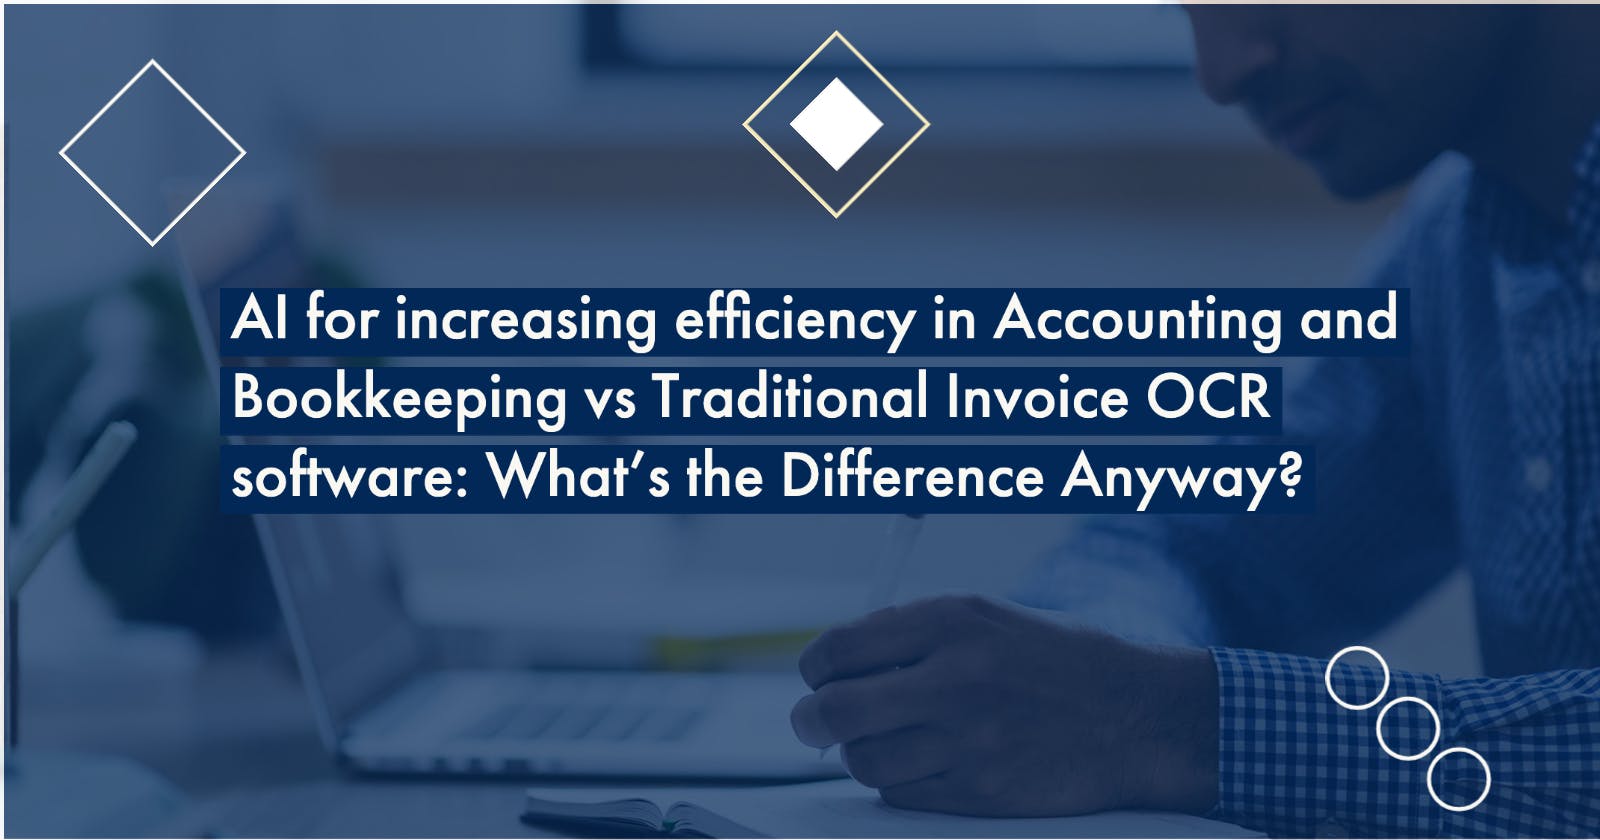 AI for increasing efficiency in Accounting and Bookkeeping vs Traditional Invoice OCR software: What's the Difference Anyway?